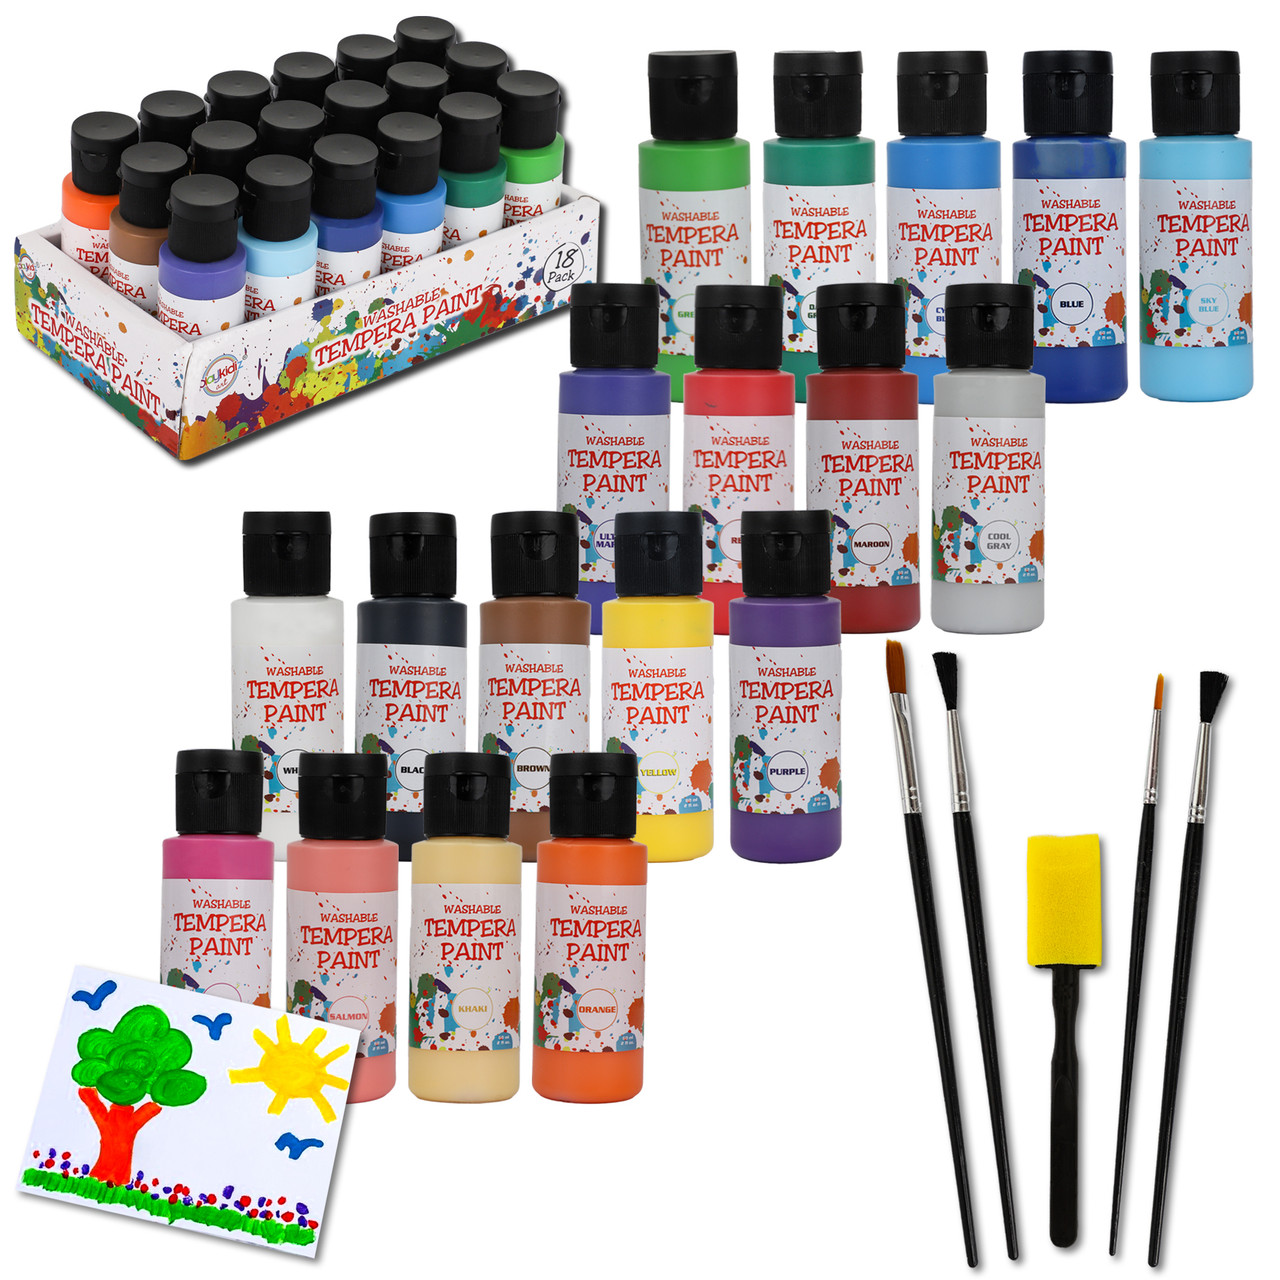 Washable Tempera Paint Kit, 6 Colors, Certified Non-toxic, One Pint Each 